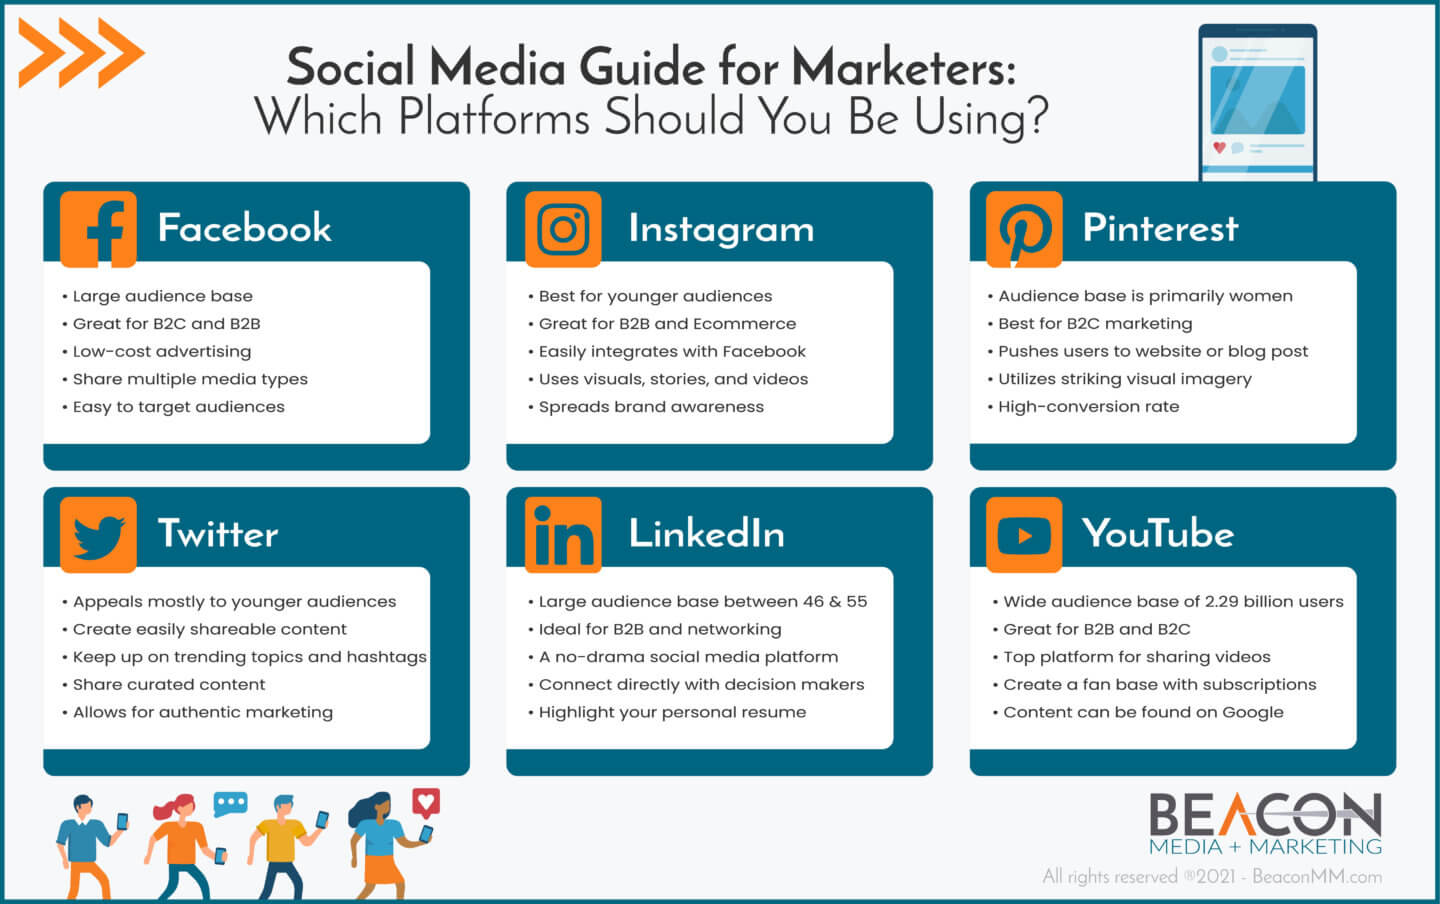 social media guide for marketers infrographic